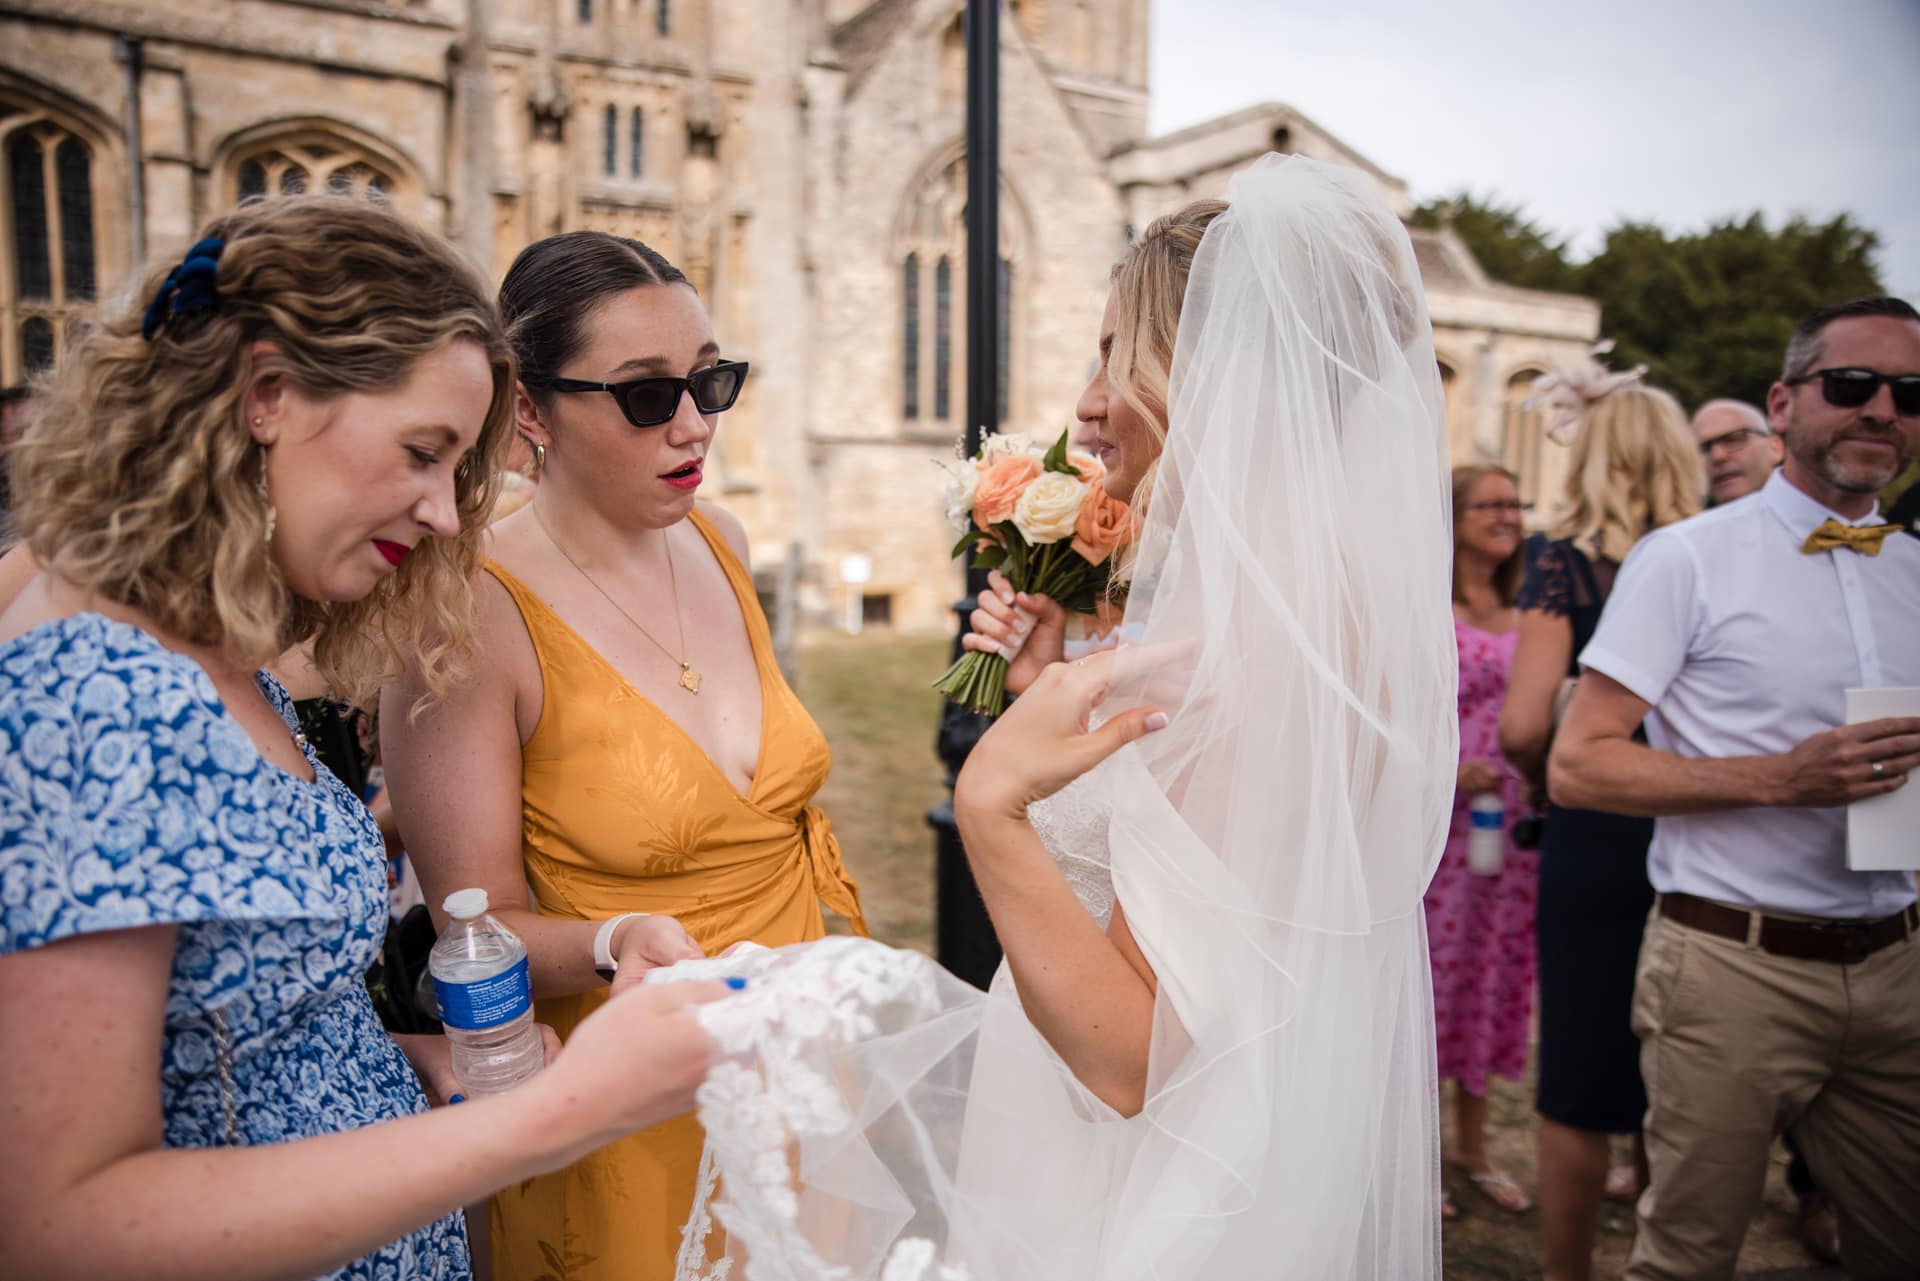 Bride chatting to friends outside the church